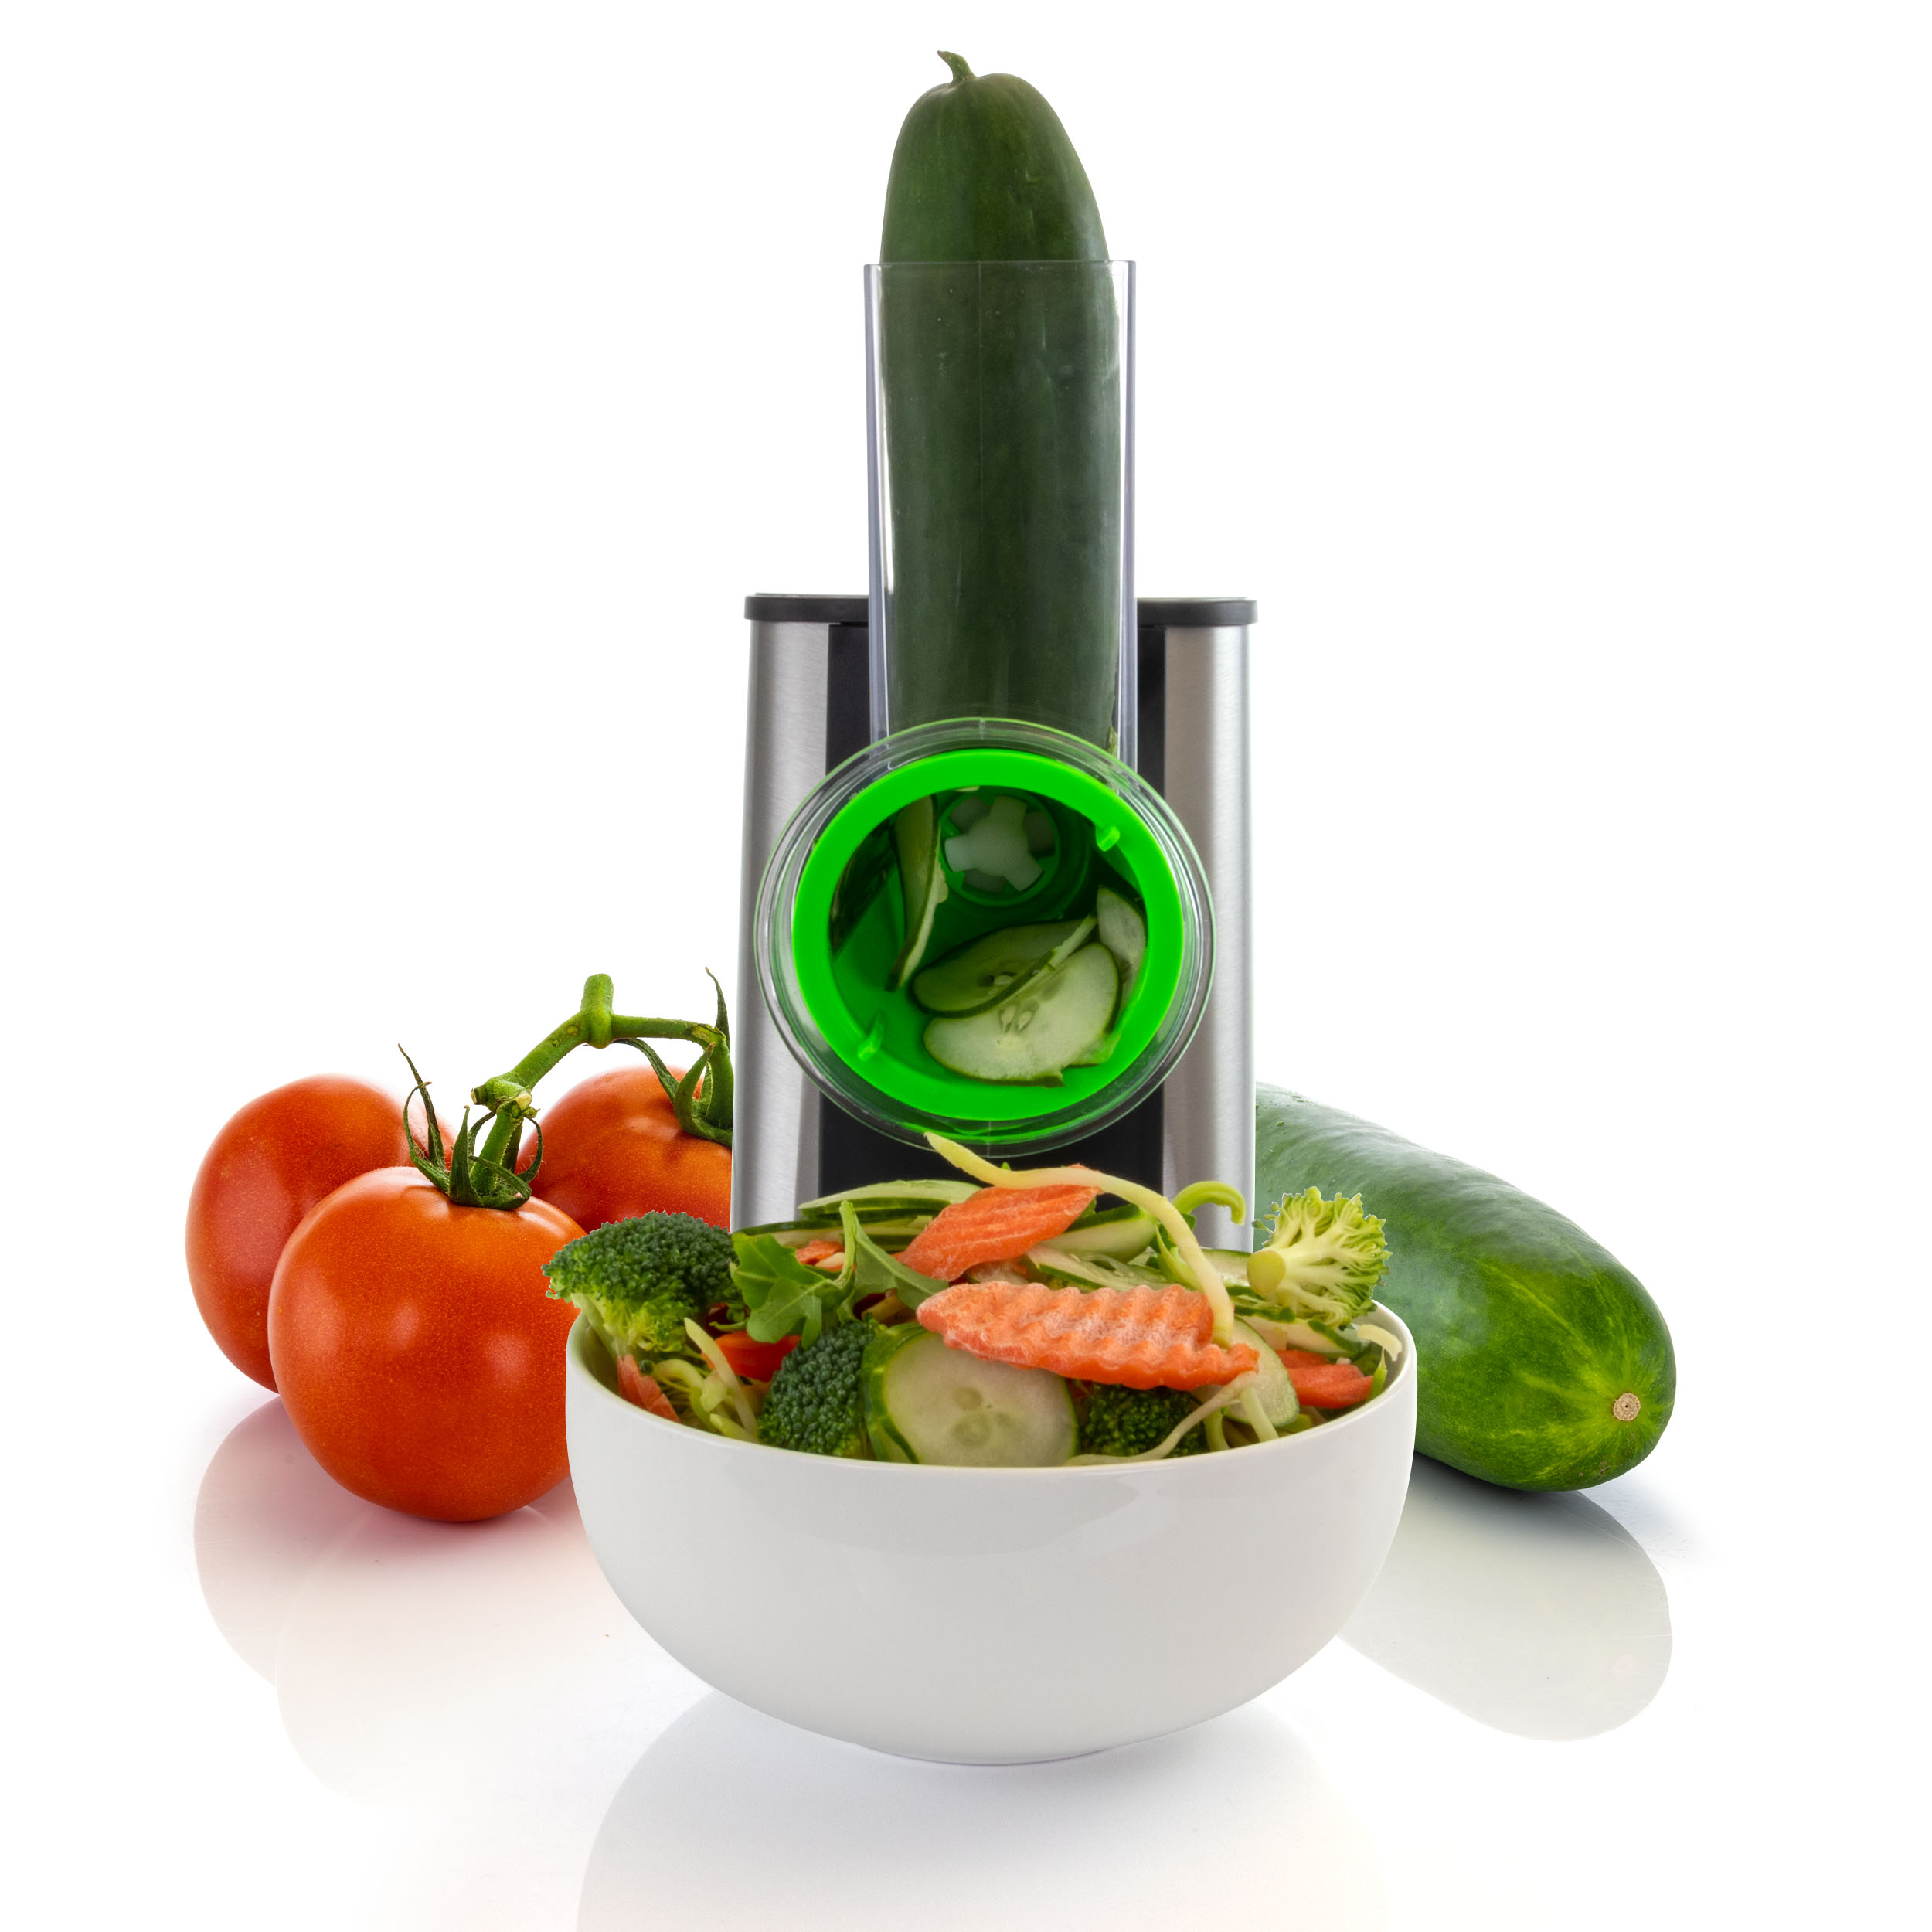 MegaChef 4-in-1 Stainless-Steel Electric Salad Maker